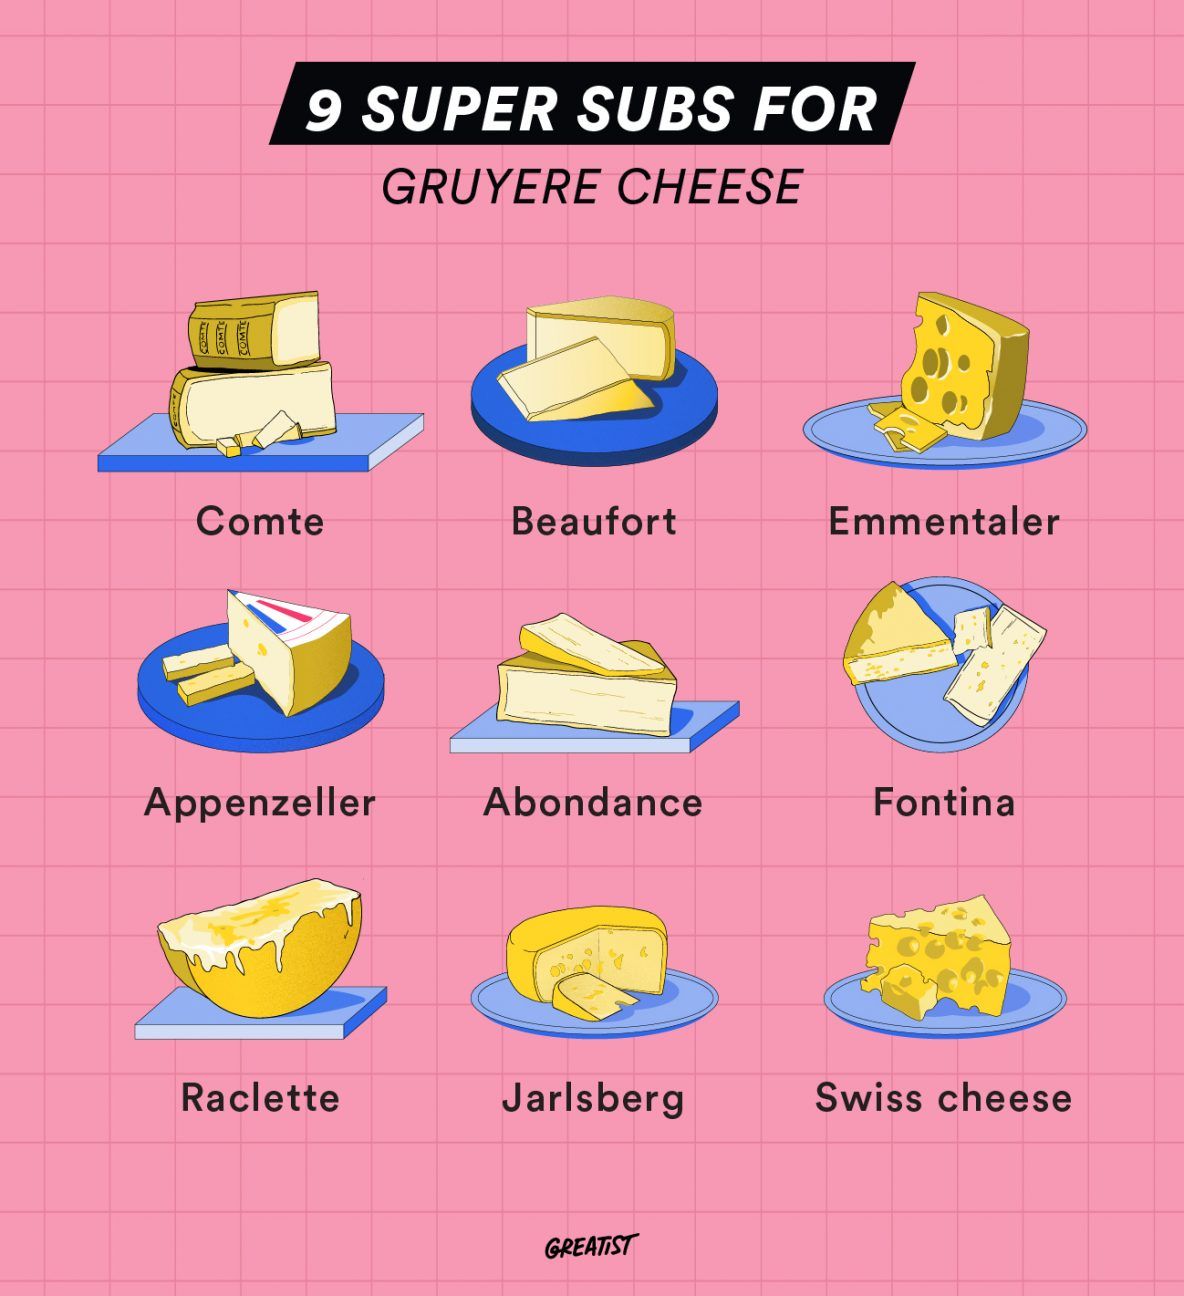 10 Gruyère Cheese Substitutes (+ Best Replacements) - Insanely Good